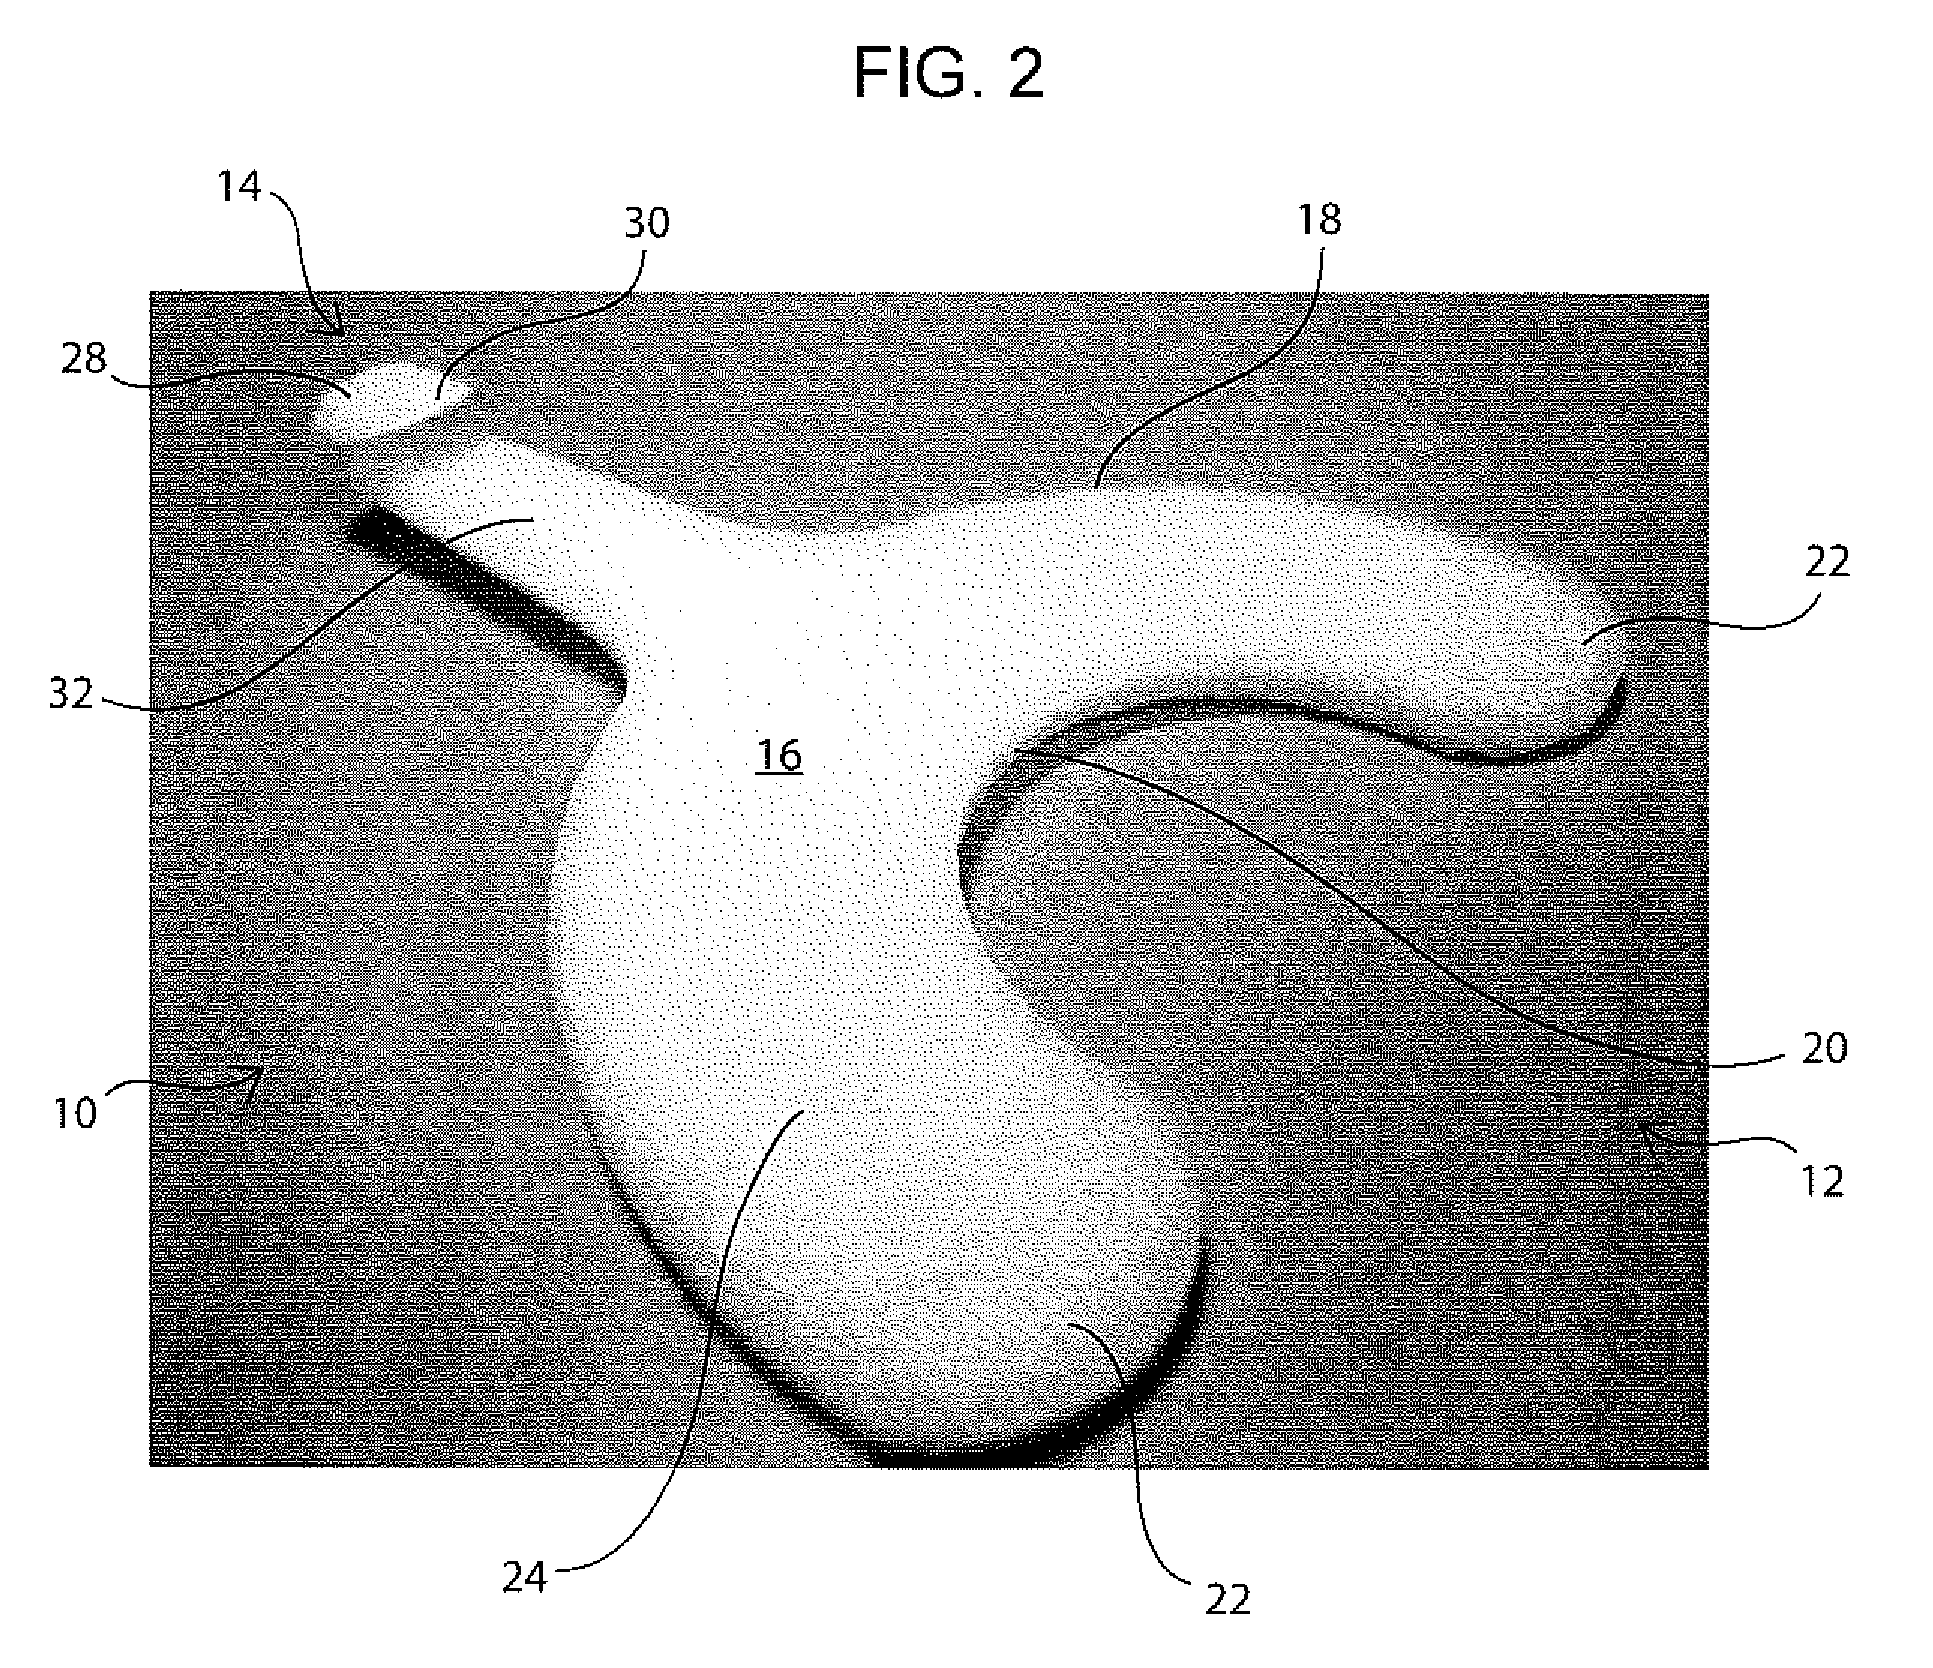 Dental aligner seating and removal tool and method of use